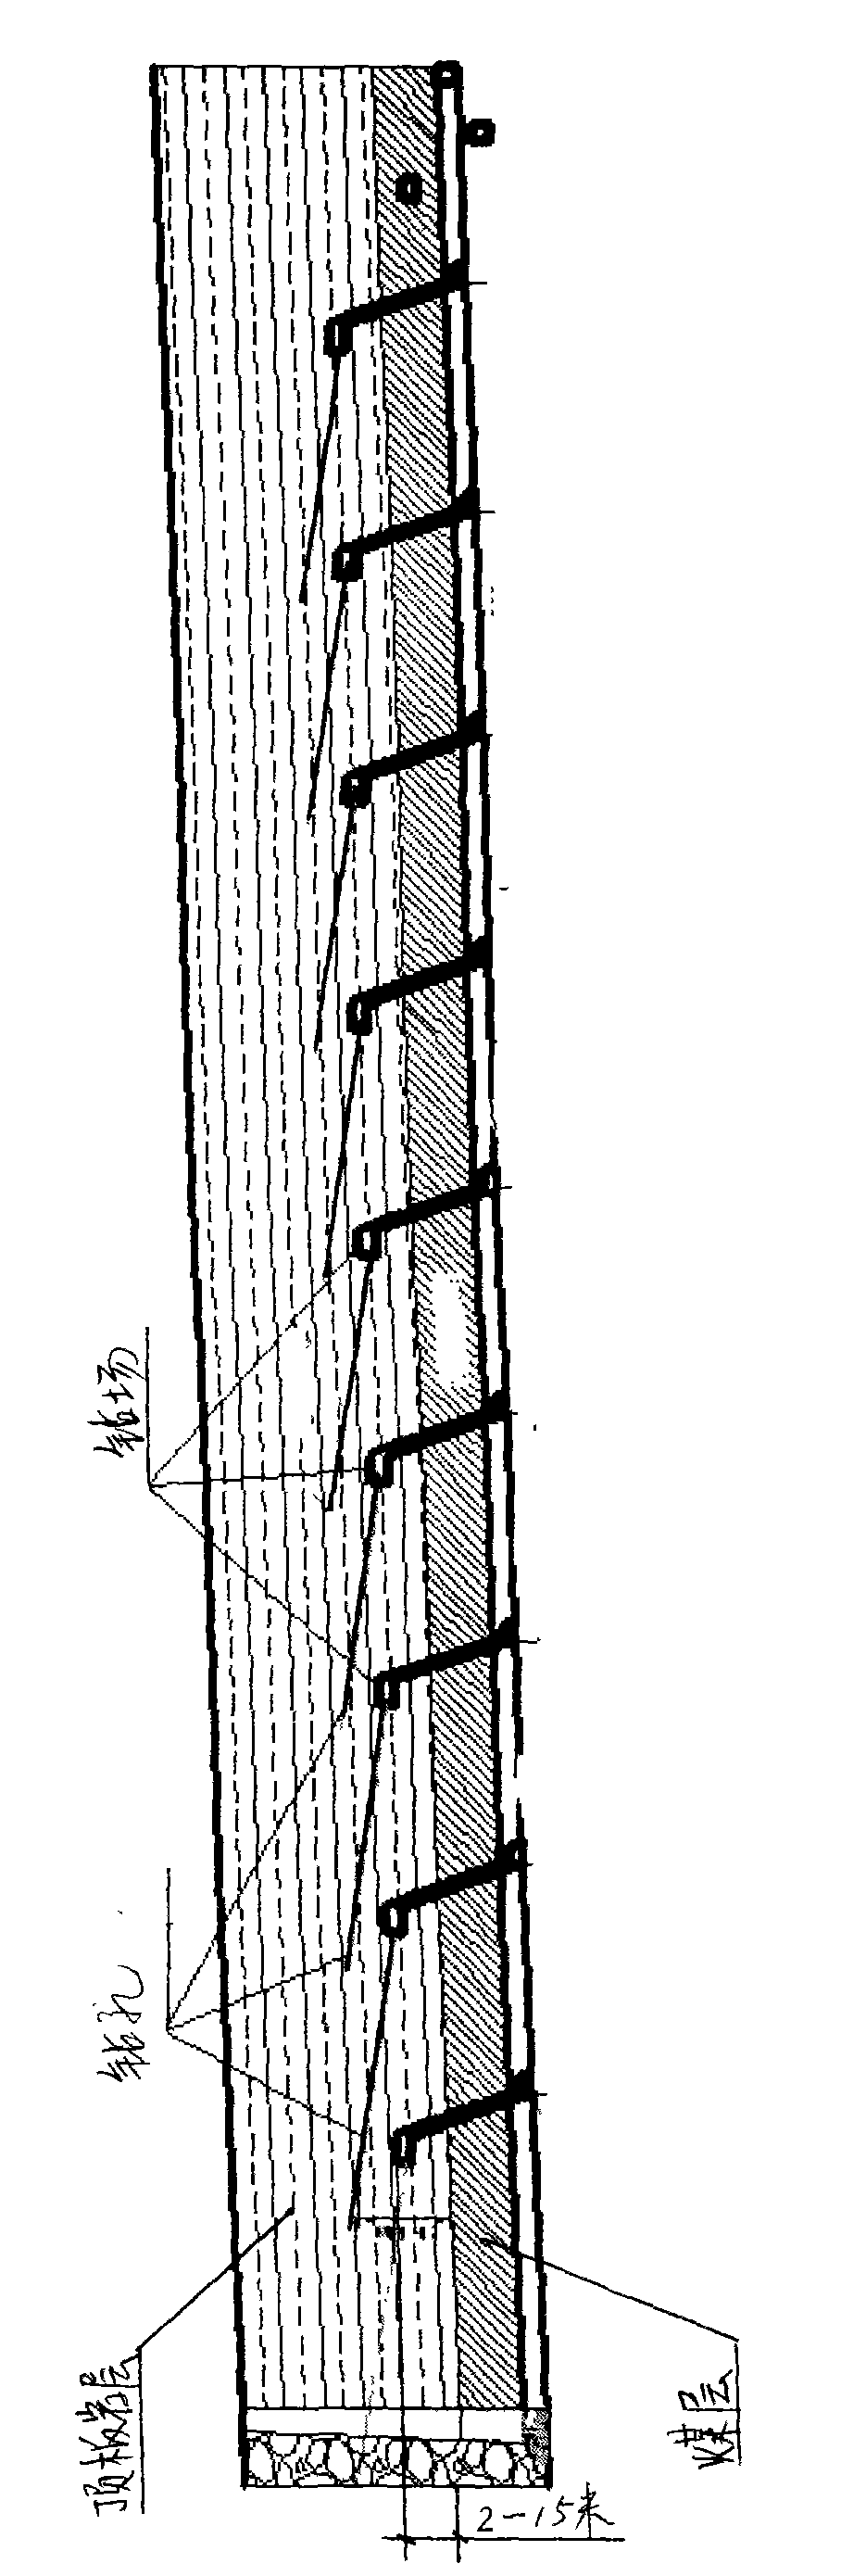 Arrangement method for gas drainage drill sites of highly-gassy fully-mechanized top-coal caving surface